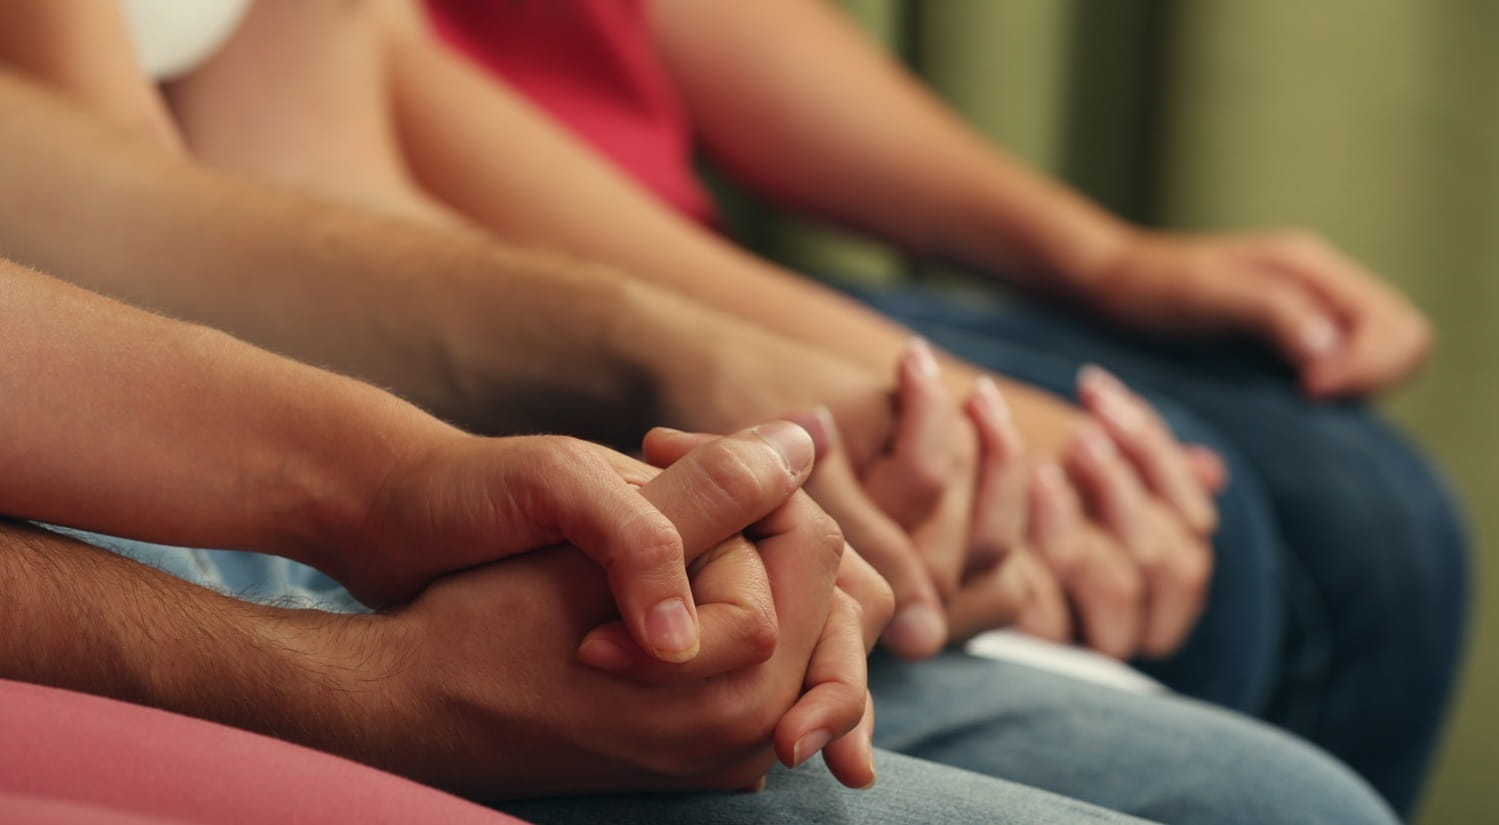 A group of adults in social care rehabilitation facilities holding hands.